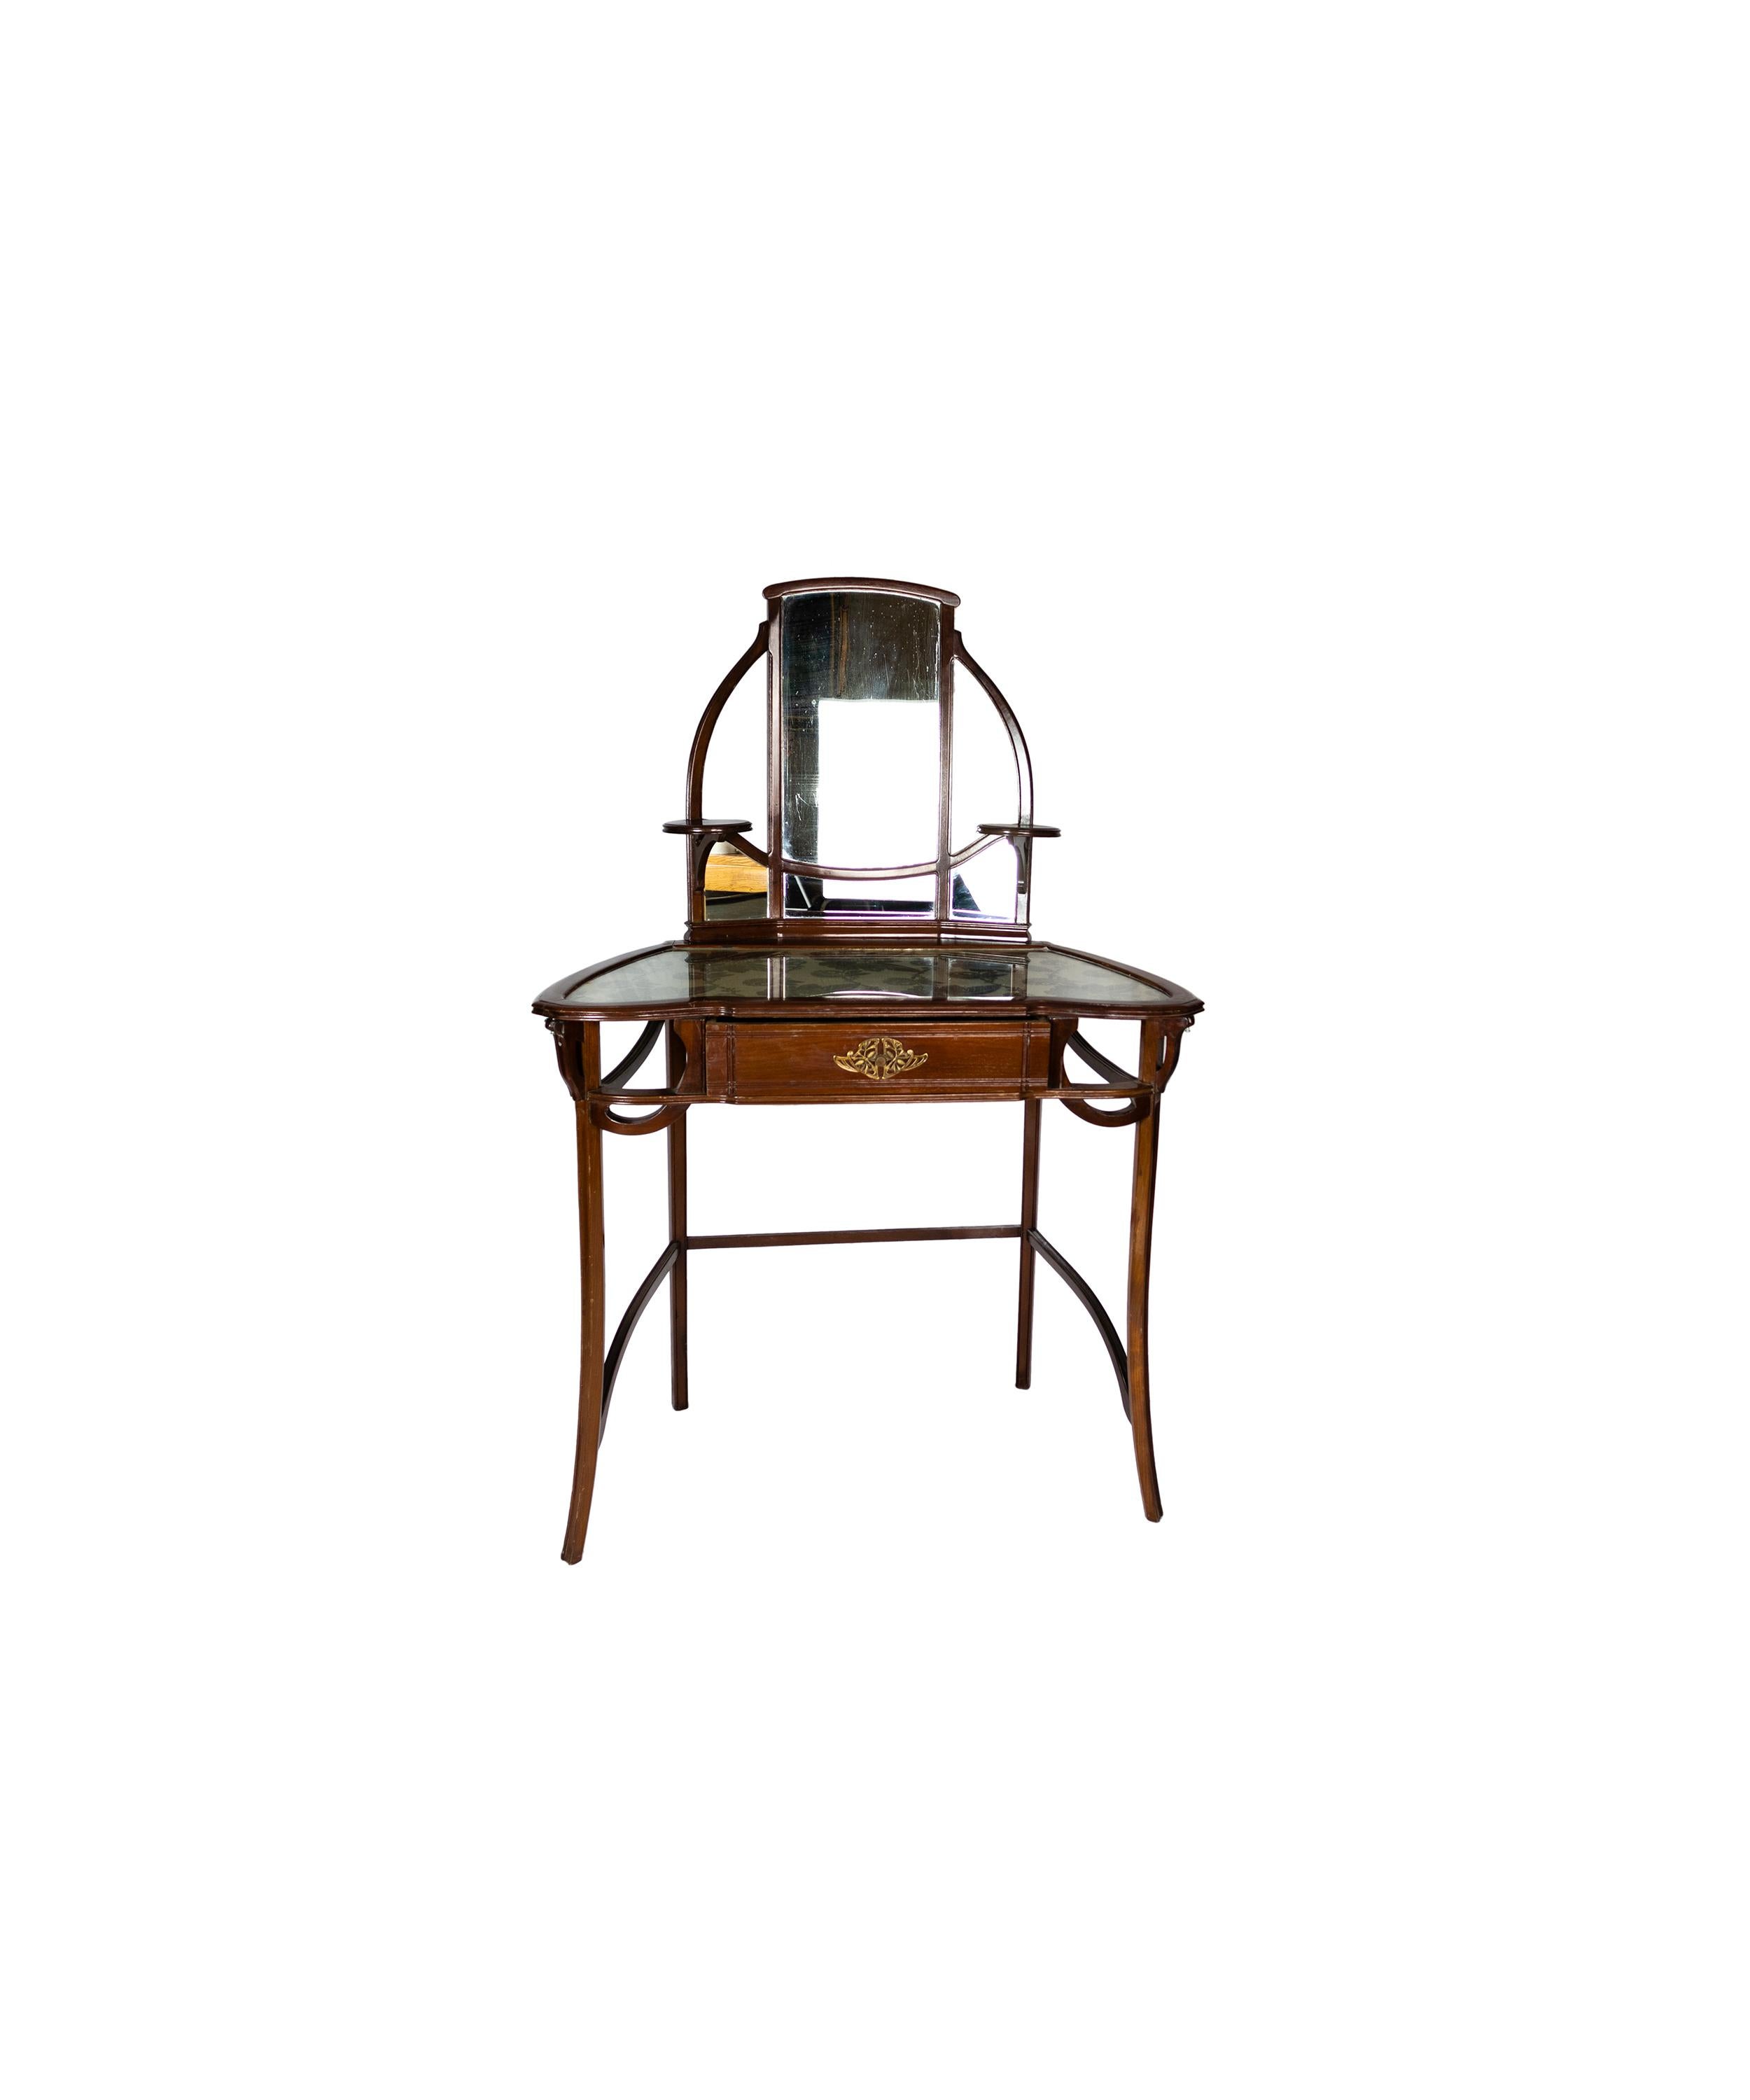 A french dressing table with mirror in cherry wood. 
An example of the elegance of Art Nouveau French design with a glass inlaid top and a mirror.
